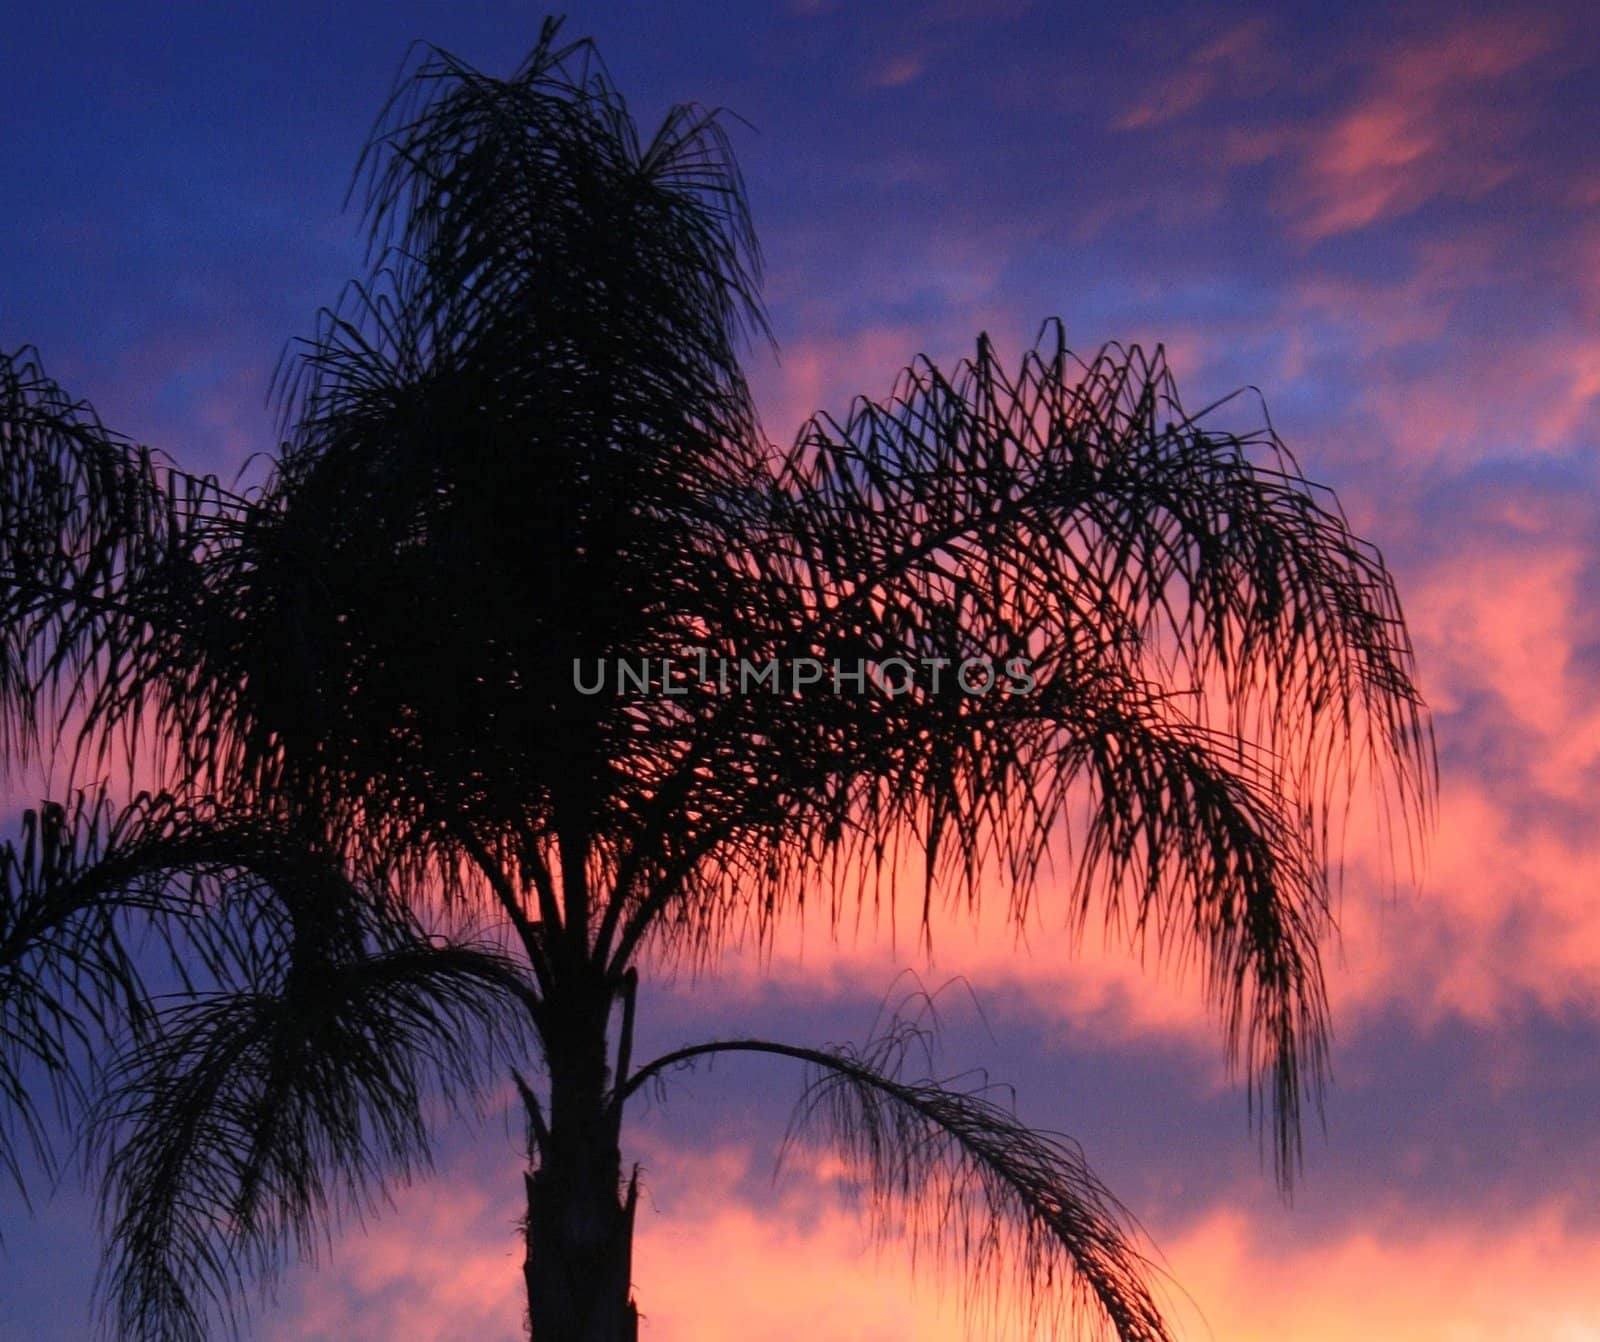 Palm Tree at Sunset by quackersnaps